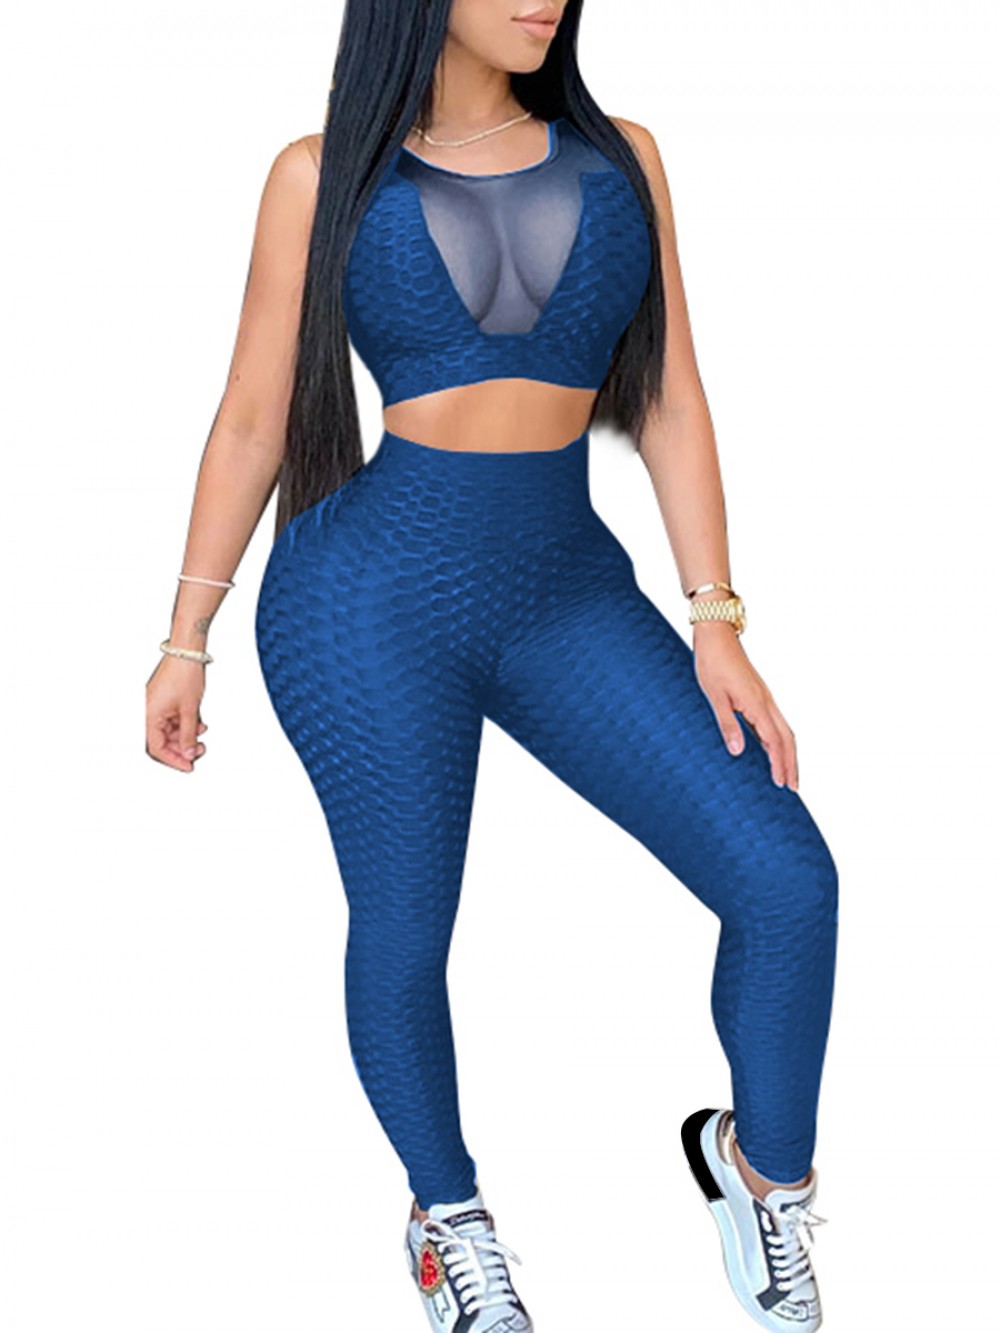 Blue Ankle Length High Rise Sports Suit Stretchy Fabric